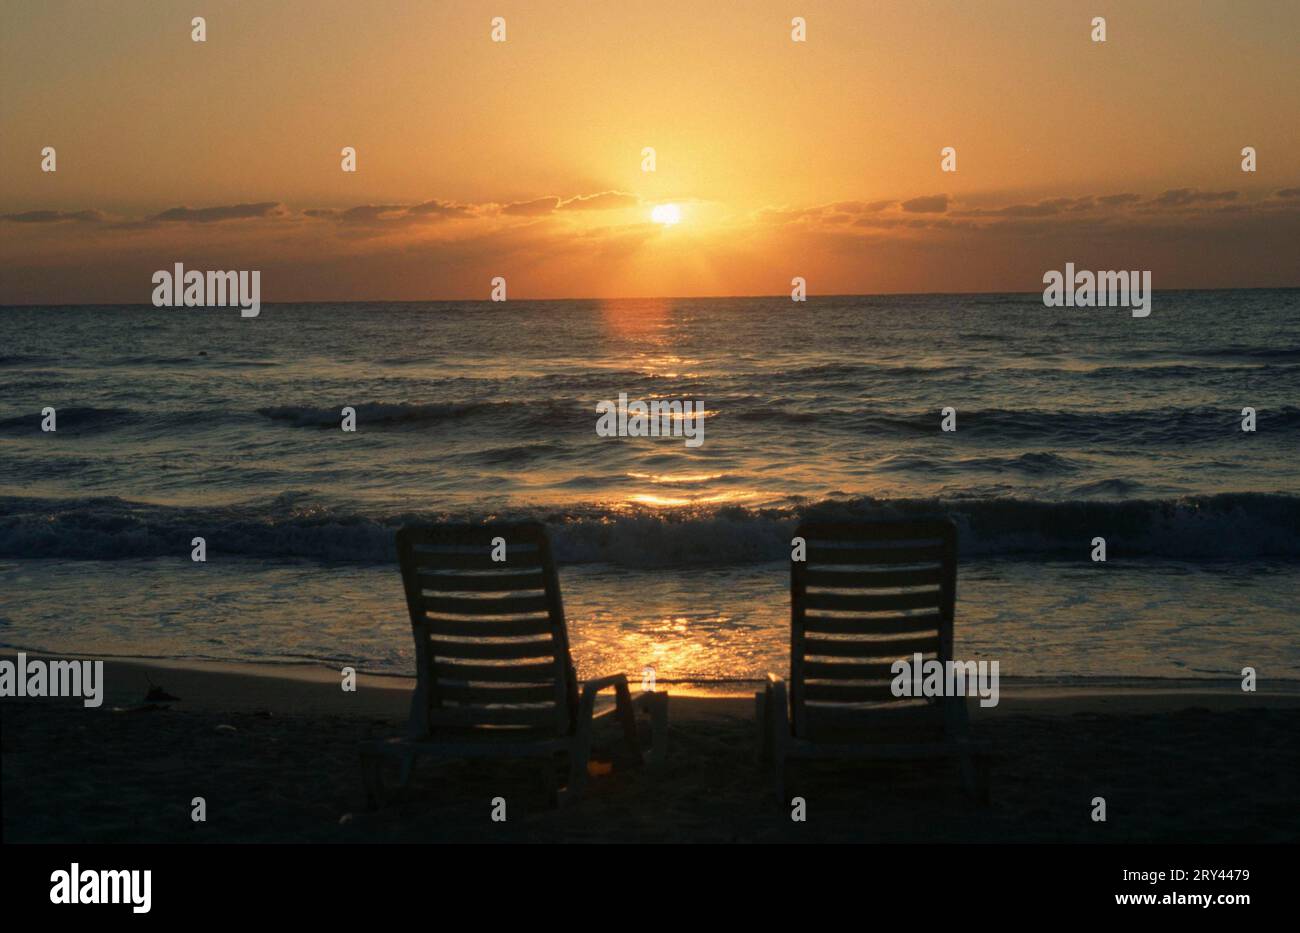 Chairs on the beach at sunset, Negril, Jamaica Stock Photo